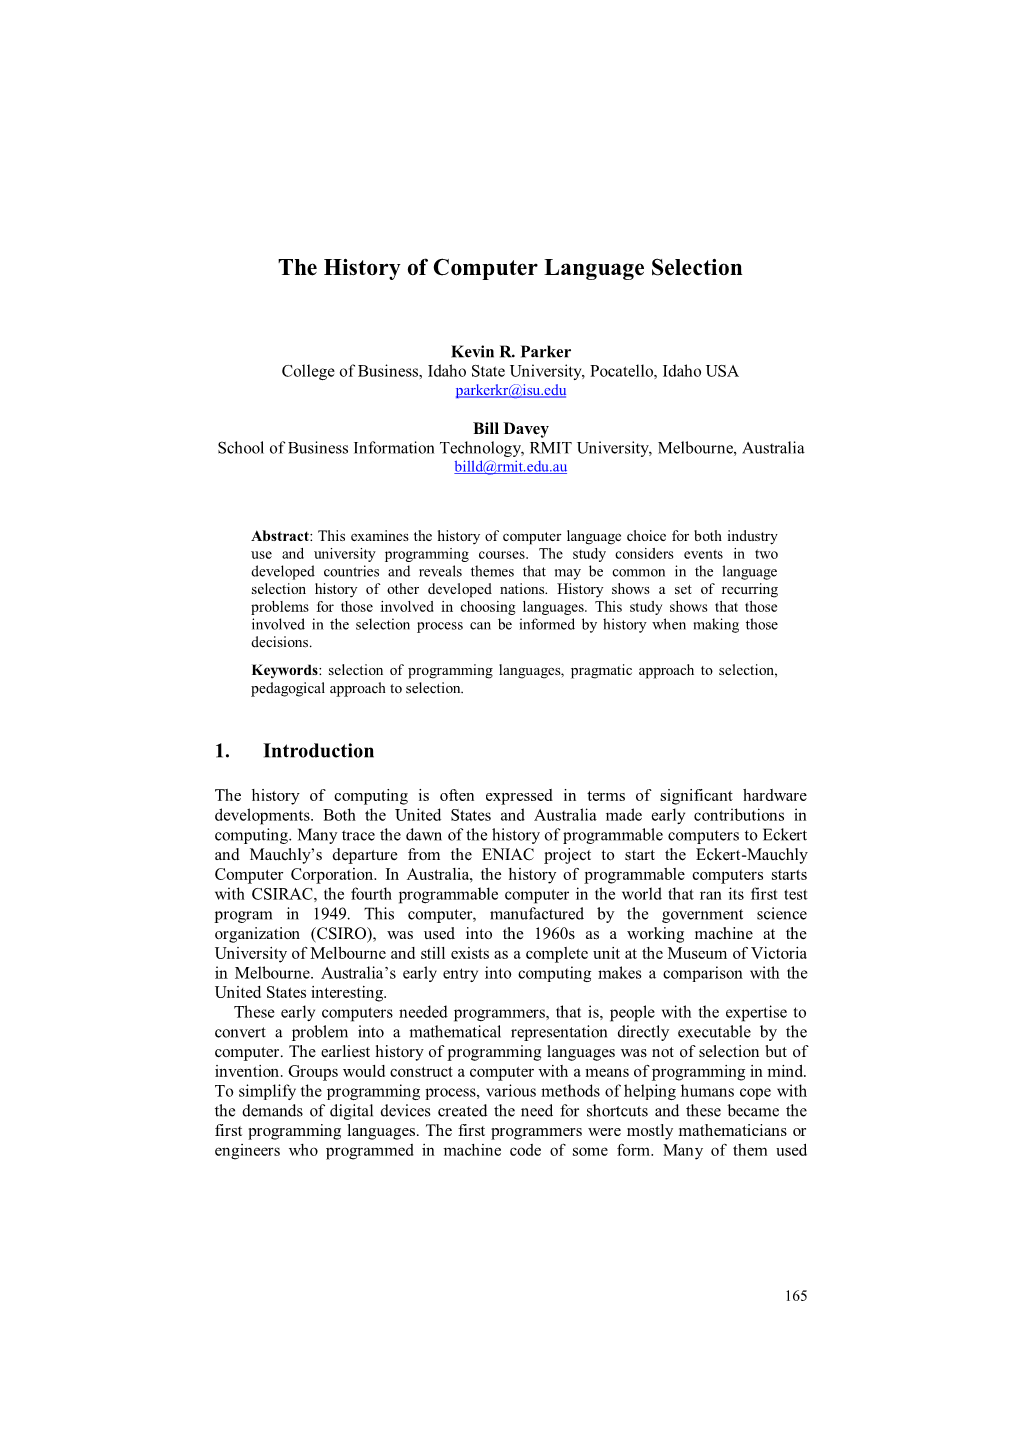 The History of Computer Language Selection